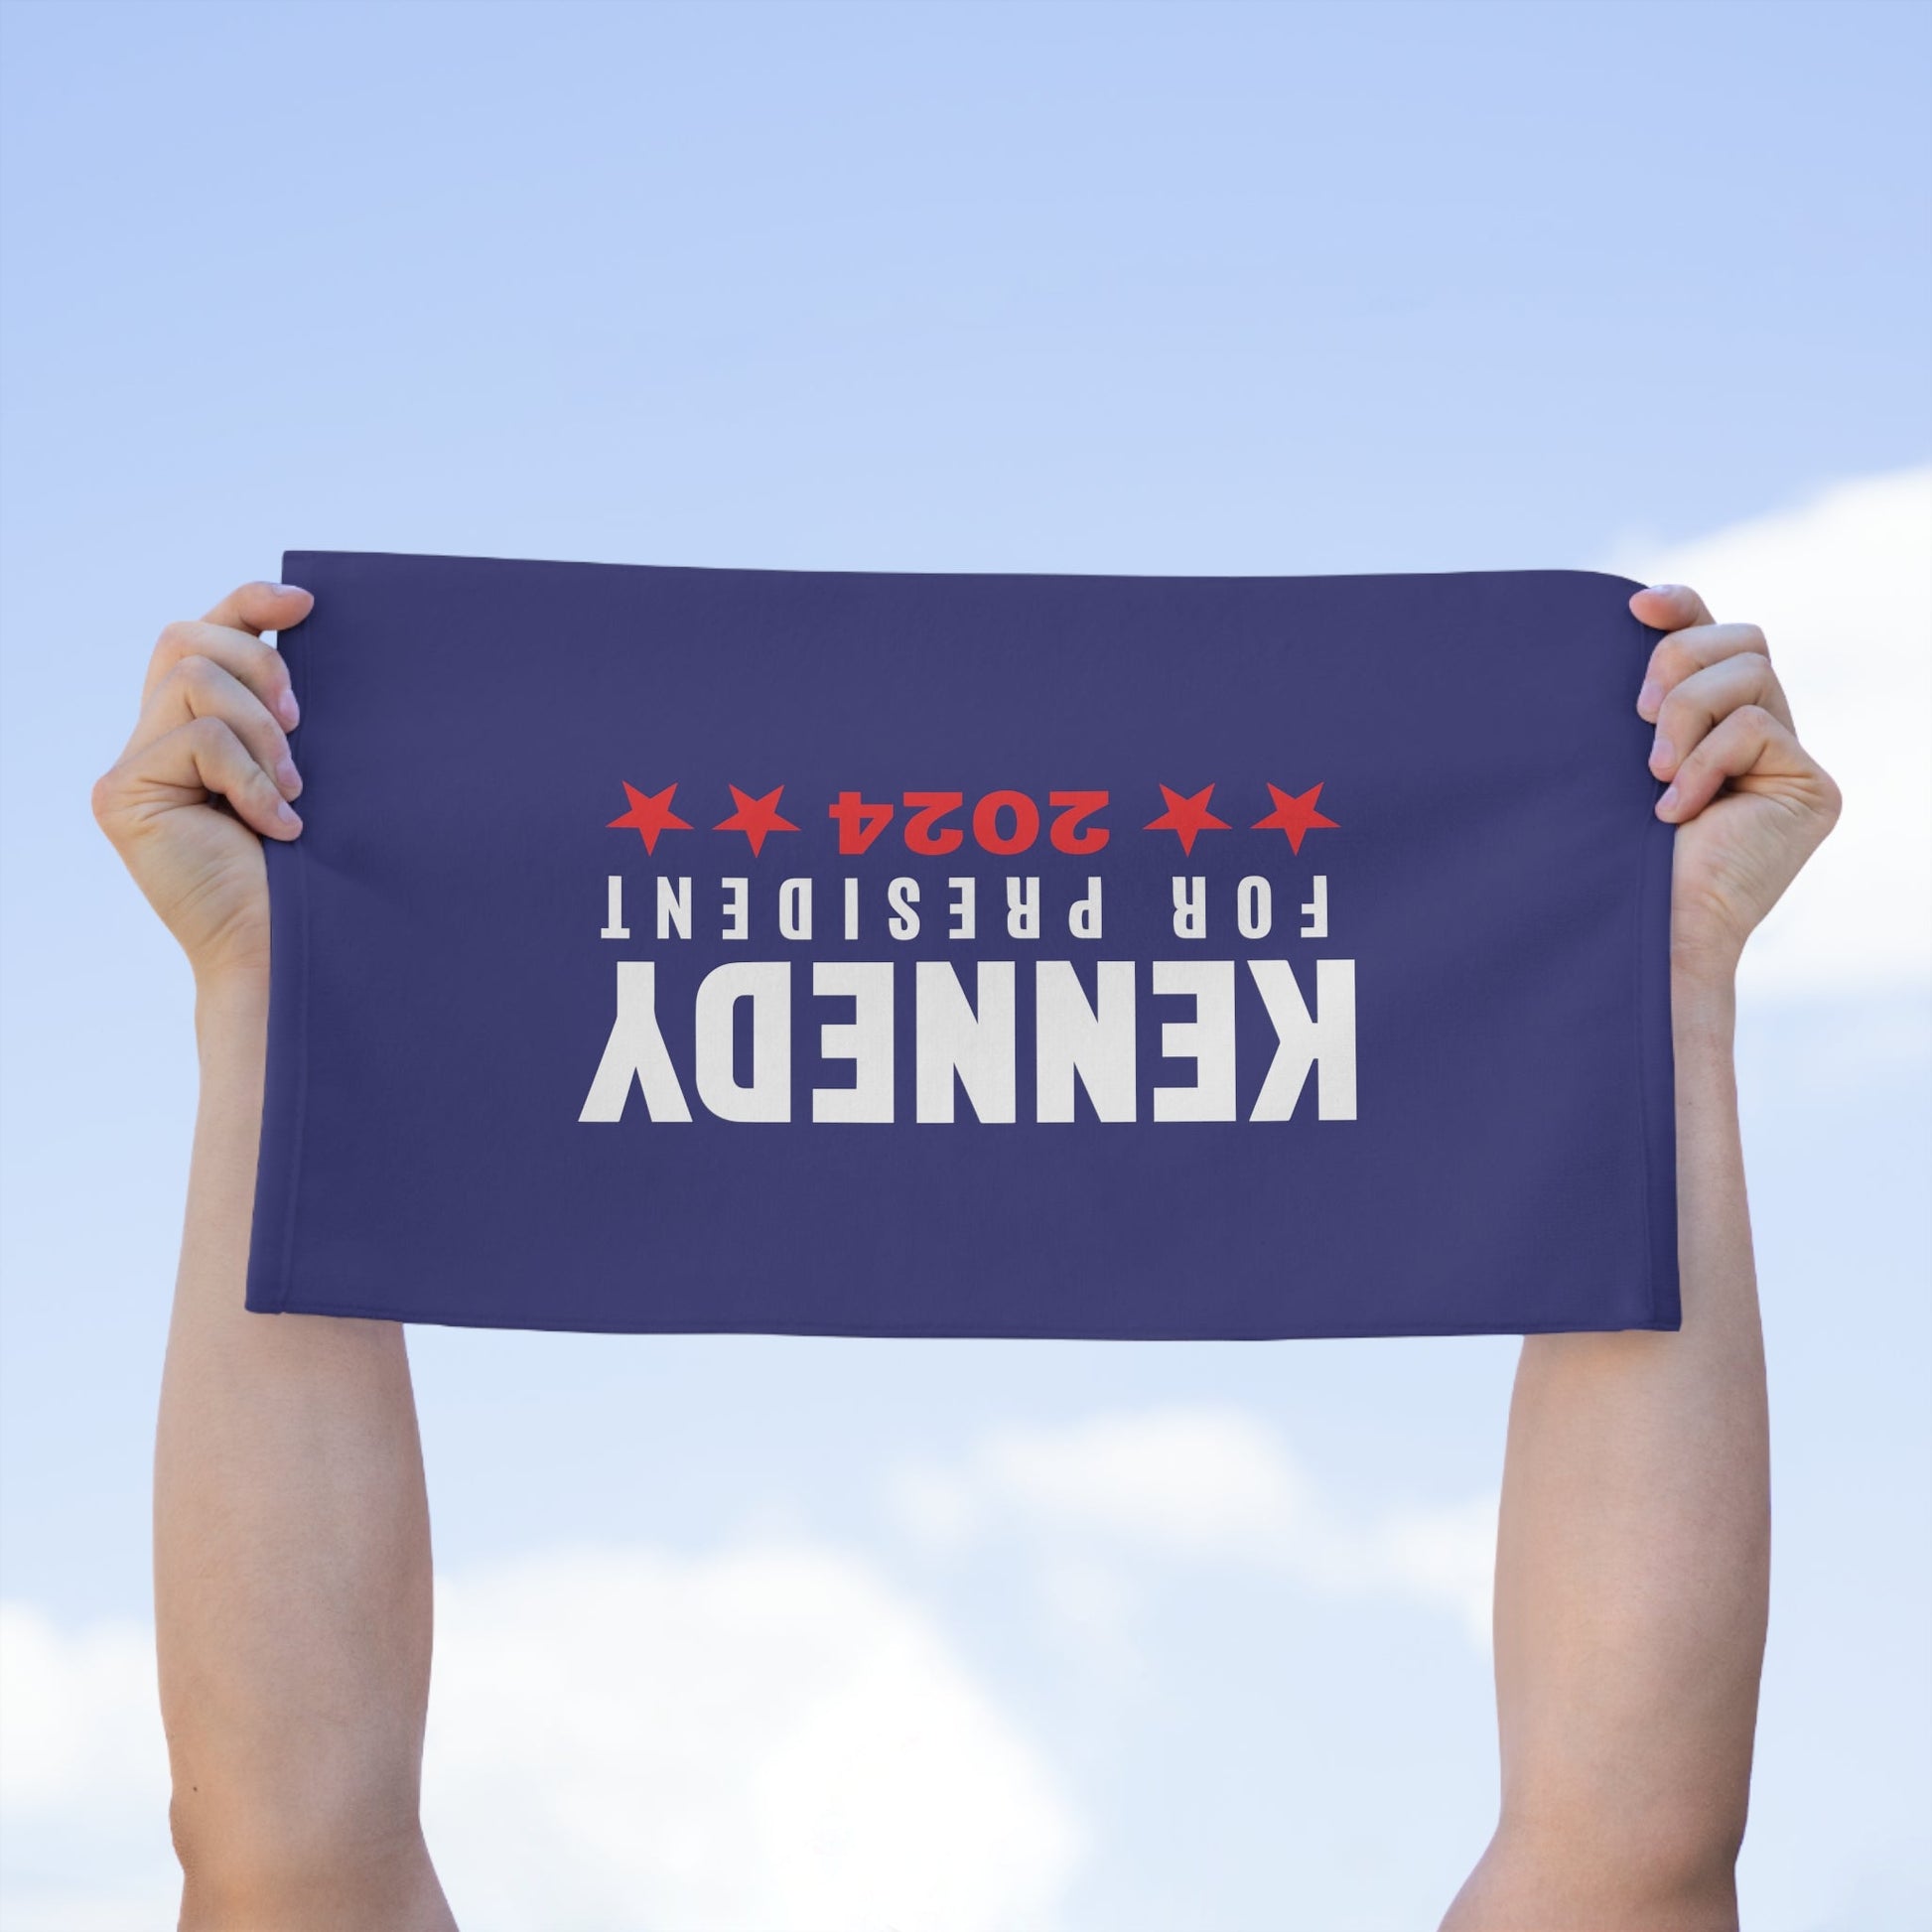 Kennedy for President Stars Rally Towel, 11x18 - TEAM KENNEDY. All rights reserved